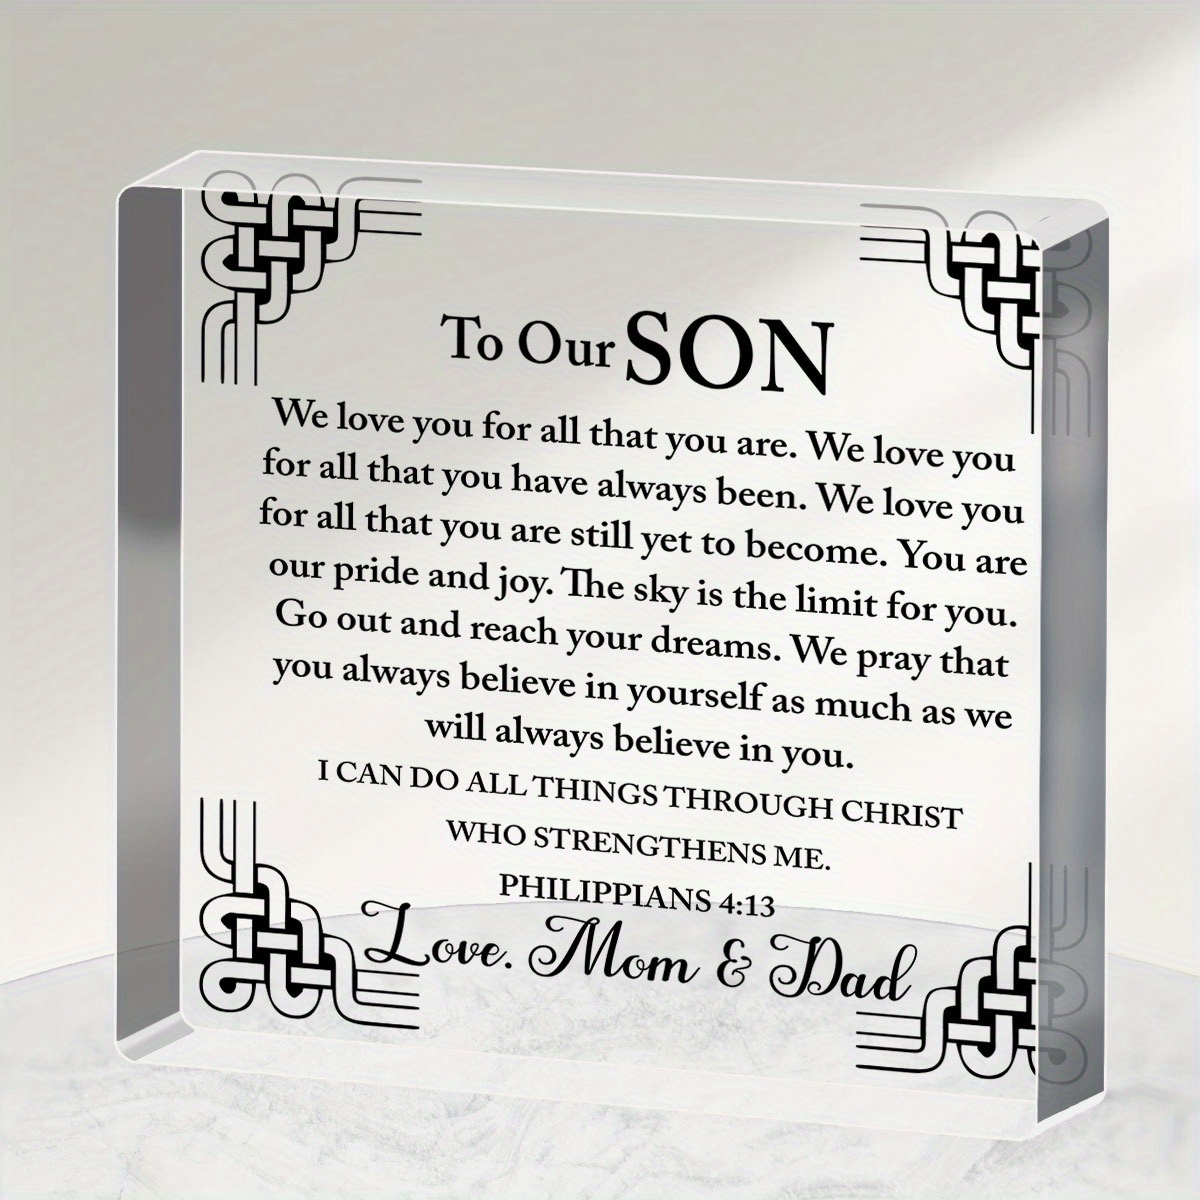  Sentimental Son Gifts From Mom And Dad To Our Son